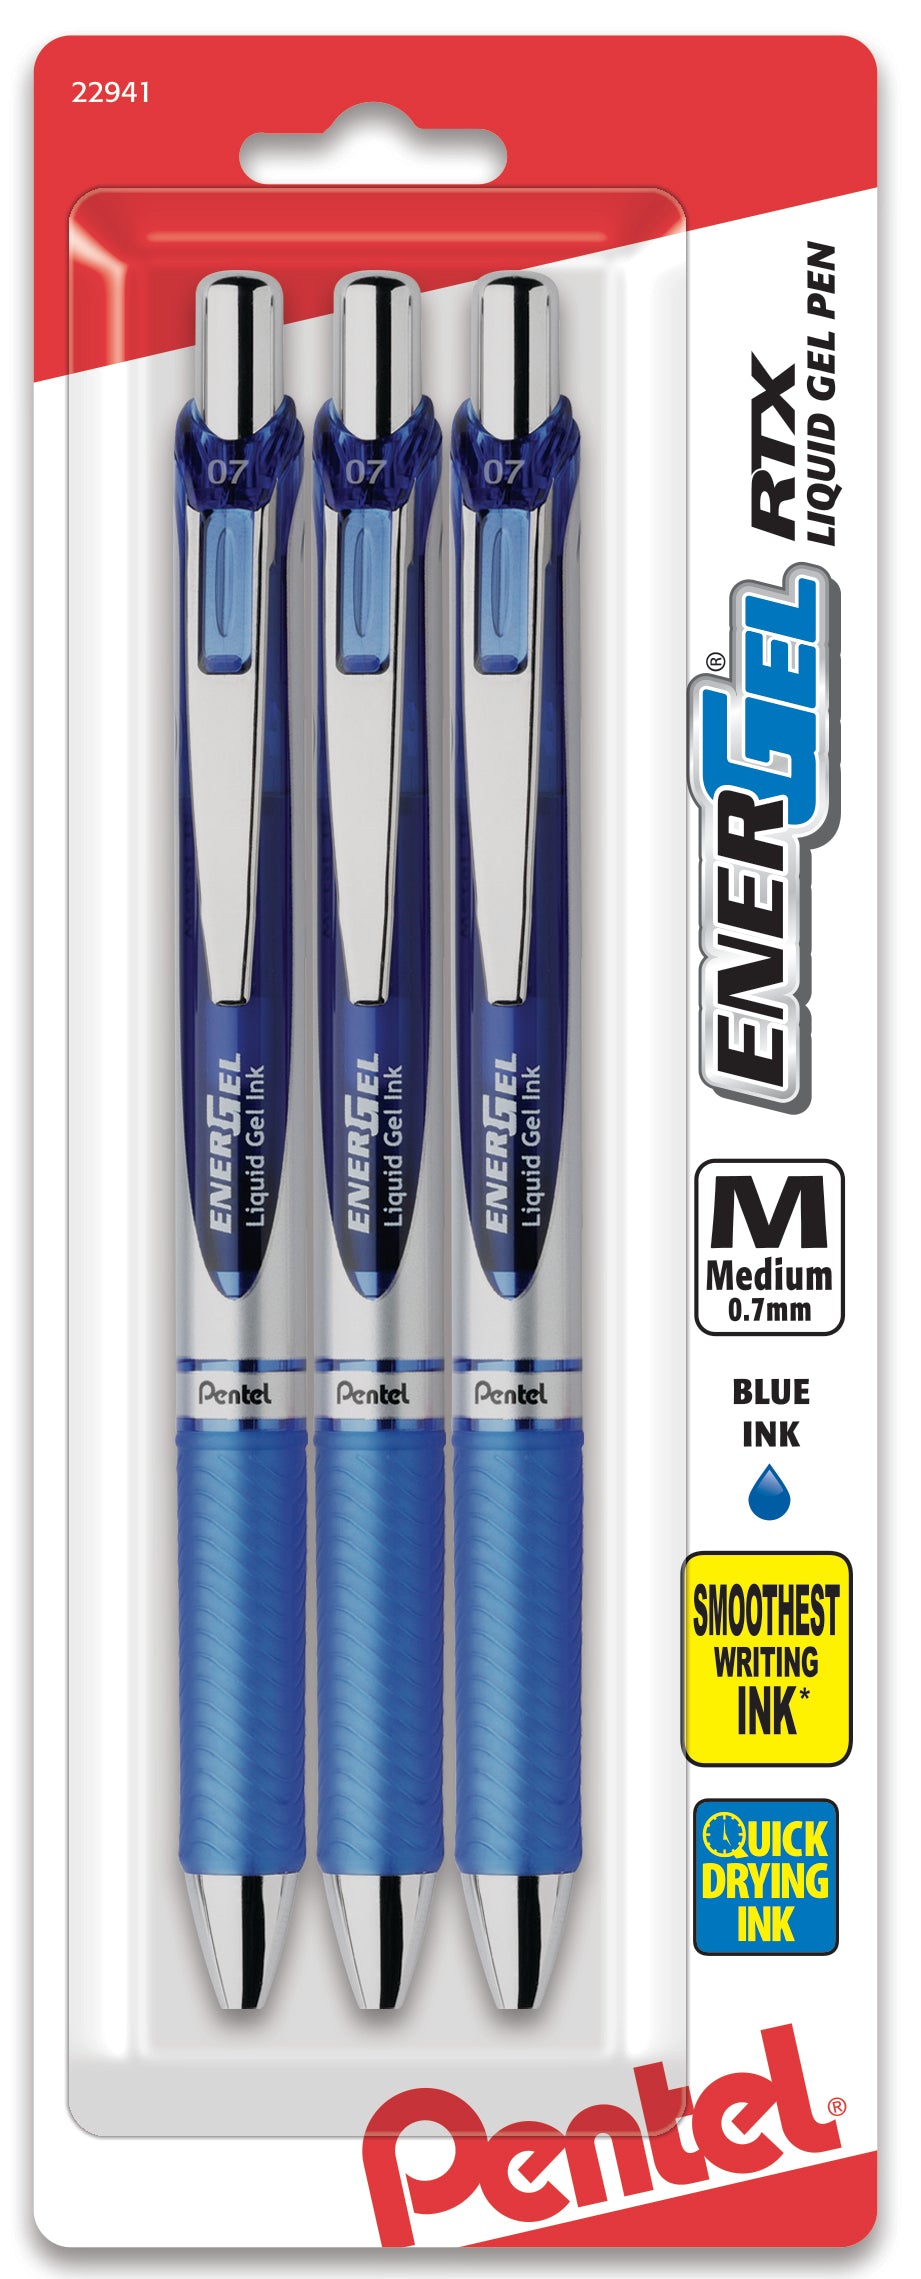 Home Retractable Gel Pens (4 Pack) Assorted Colors 